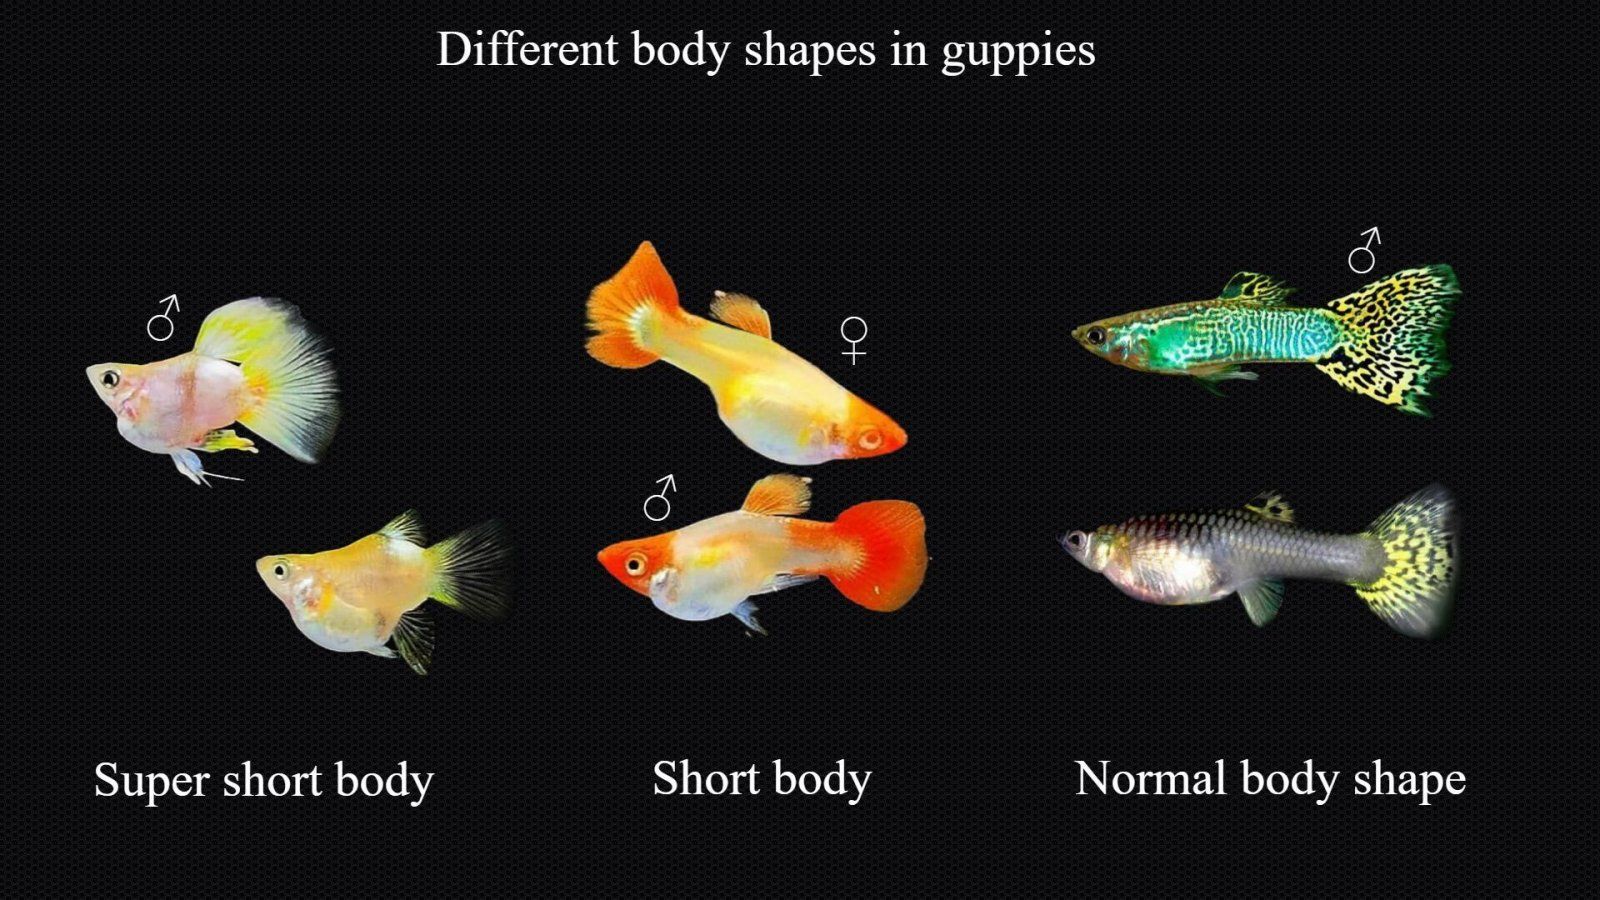 Difference in body shape in guppies1.jpg